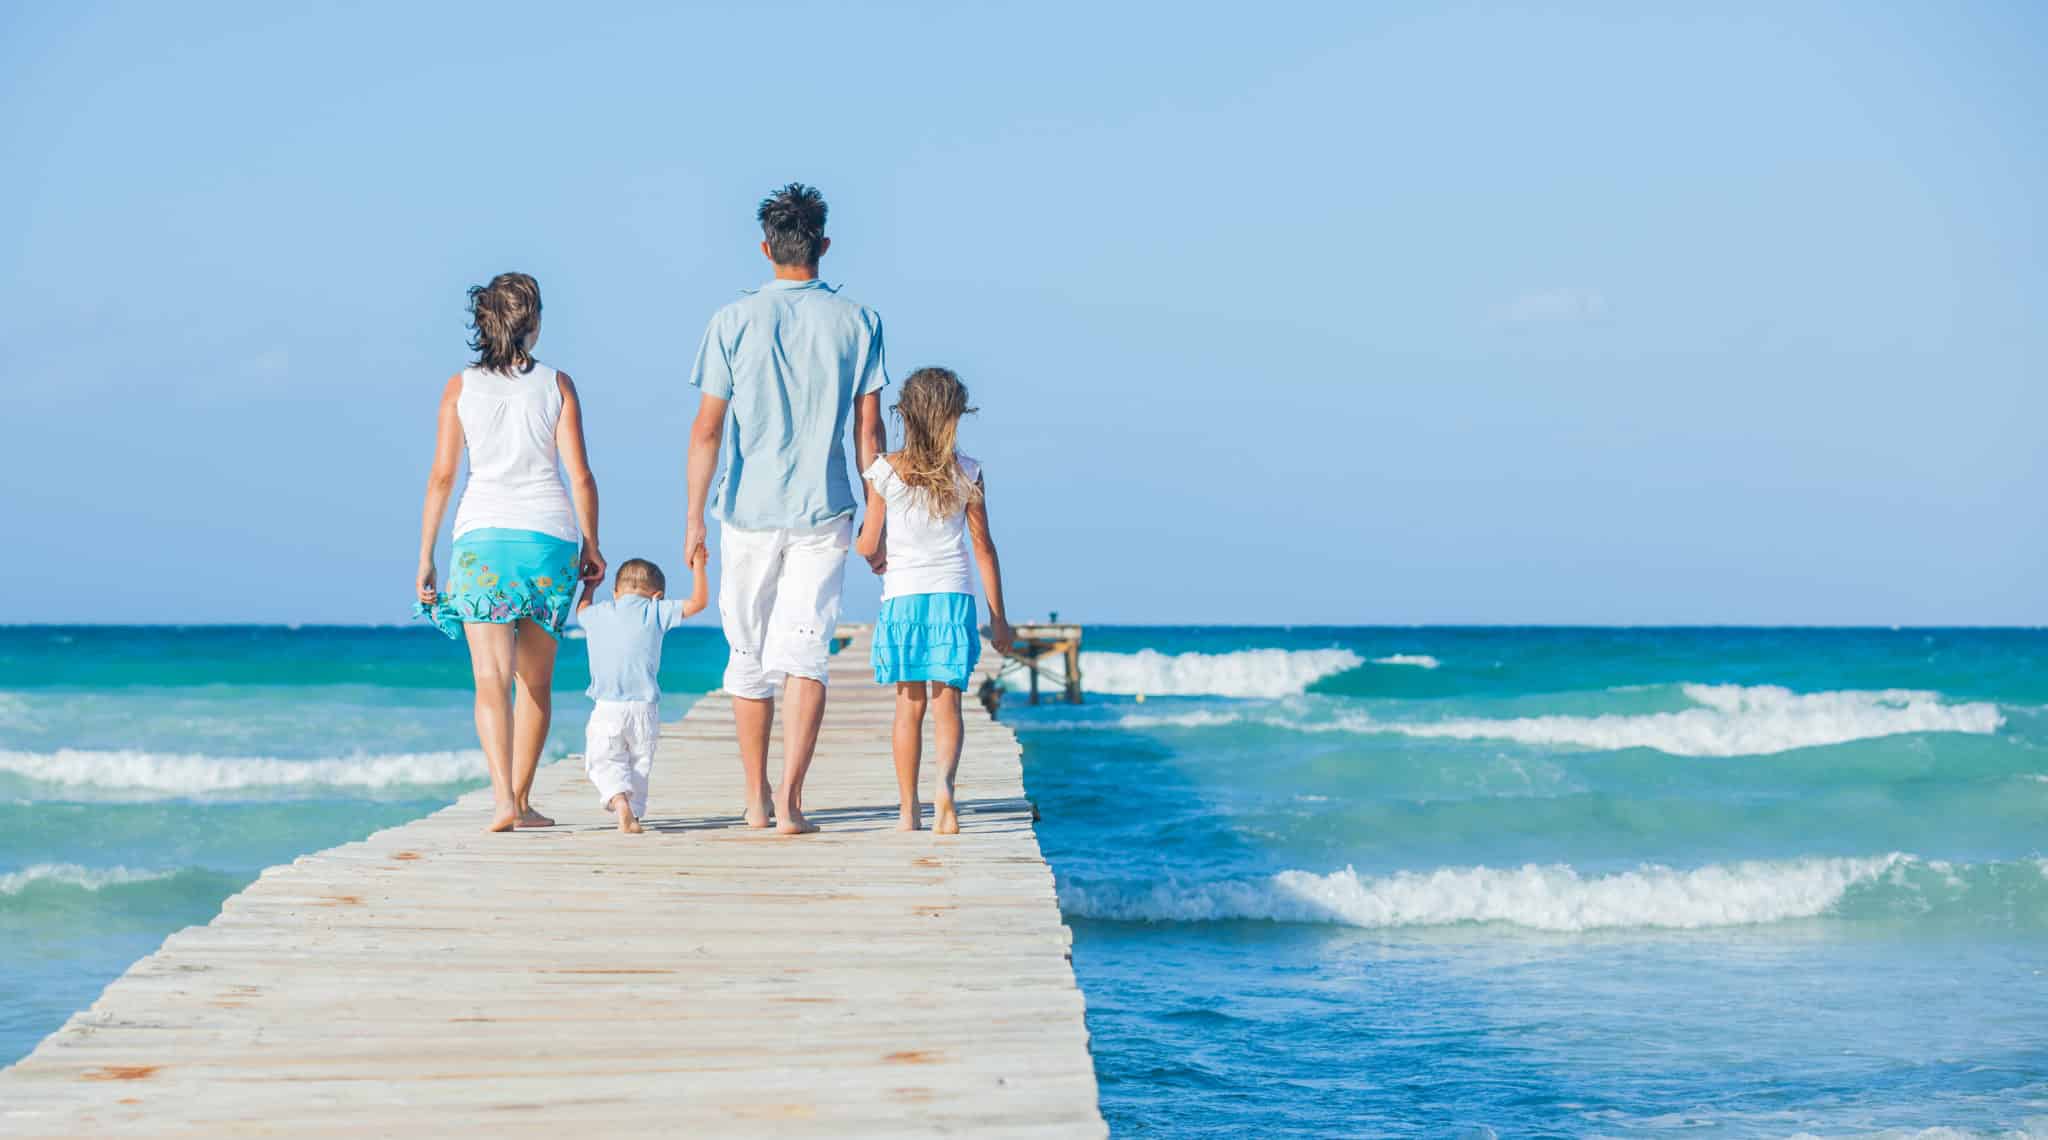 Family of four on wooden jetty by the ocean. Back view